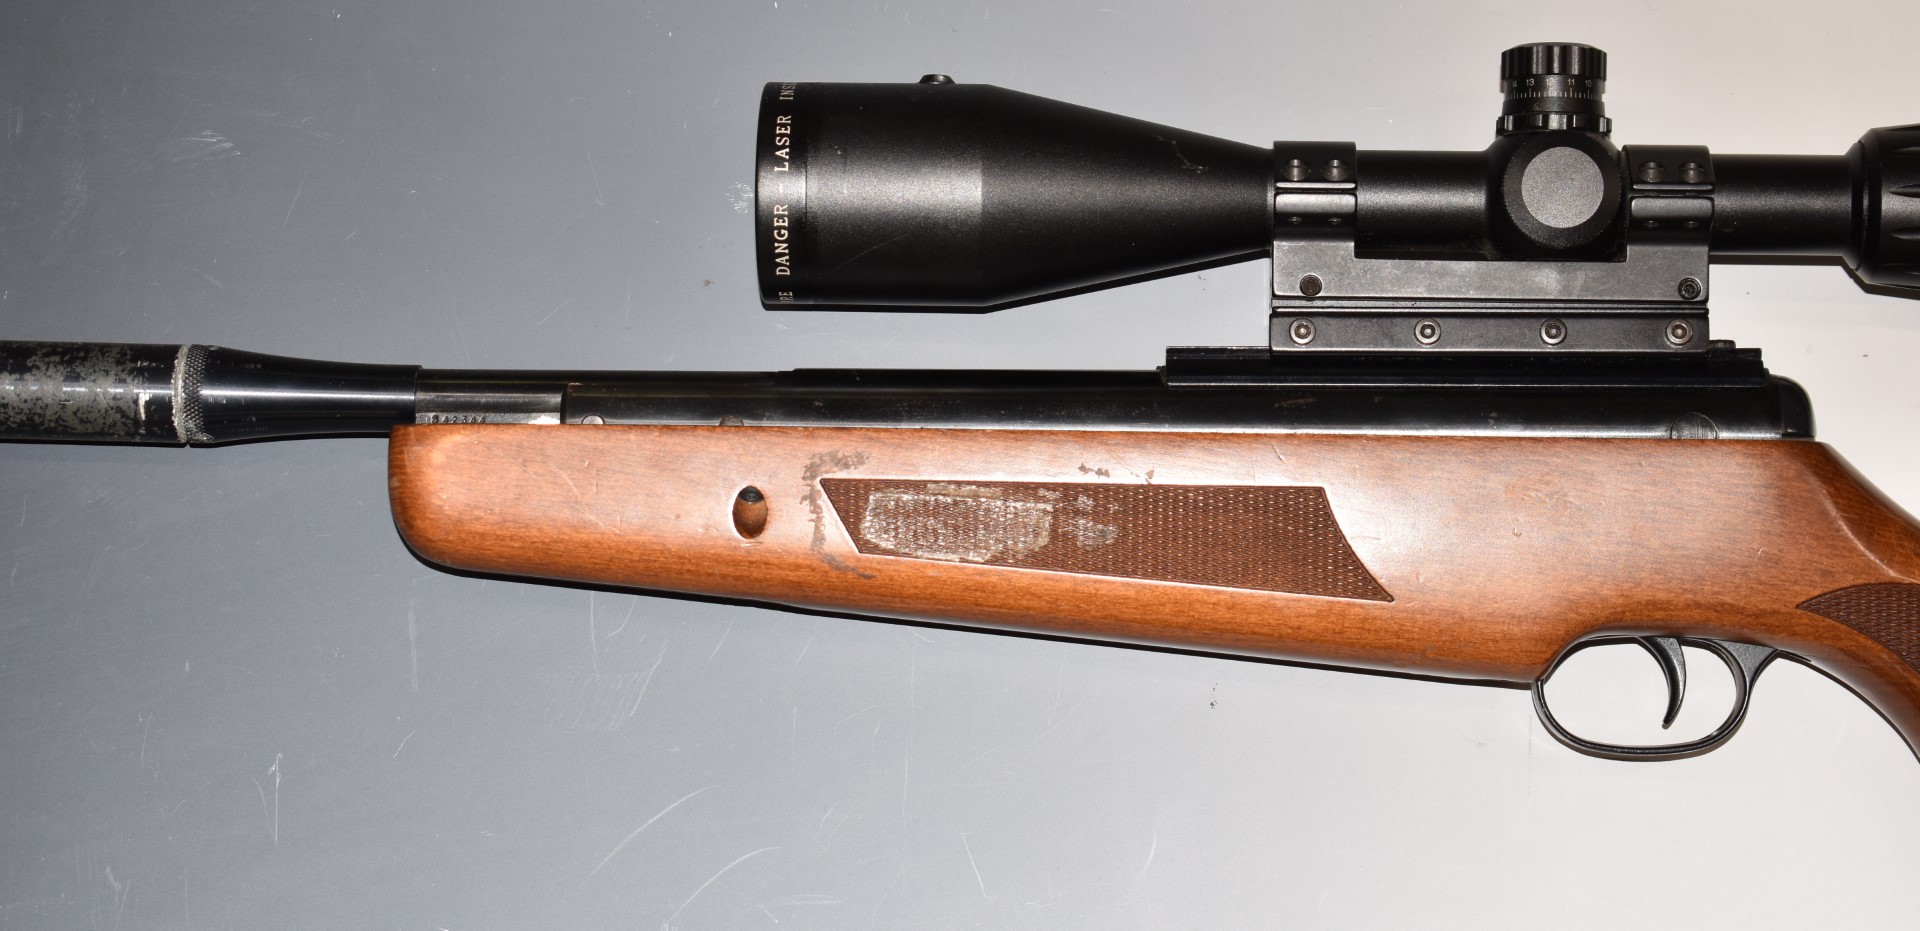 BSA .22 air rifle with chequered semi-pistol grip and forend, raised cheek piece, sound moderator - Image 8 of 10